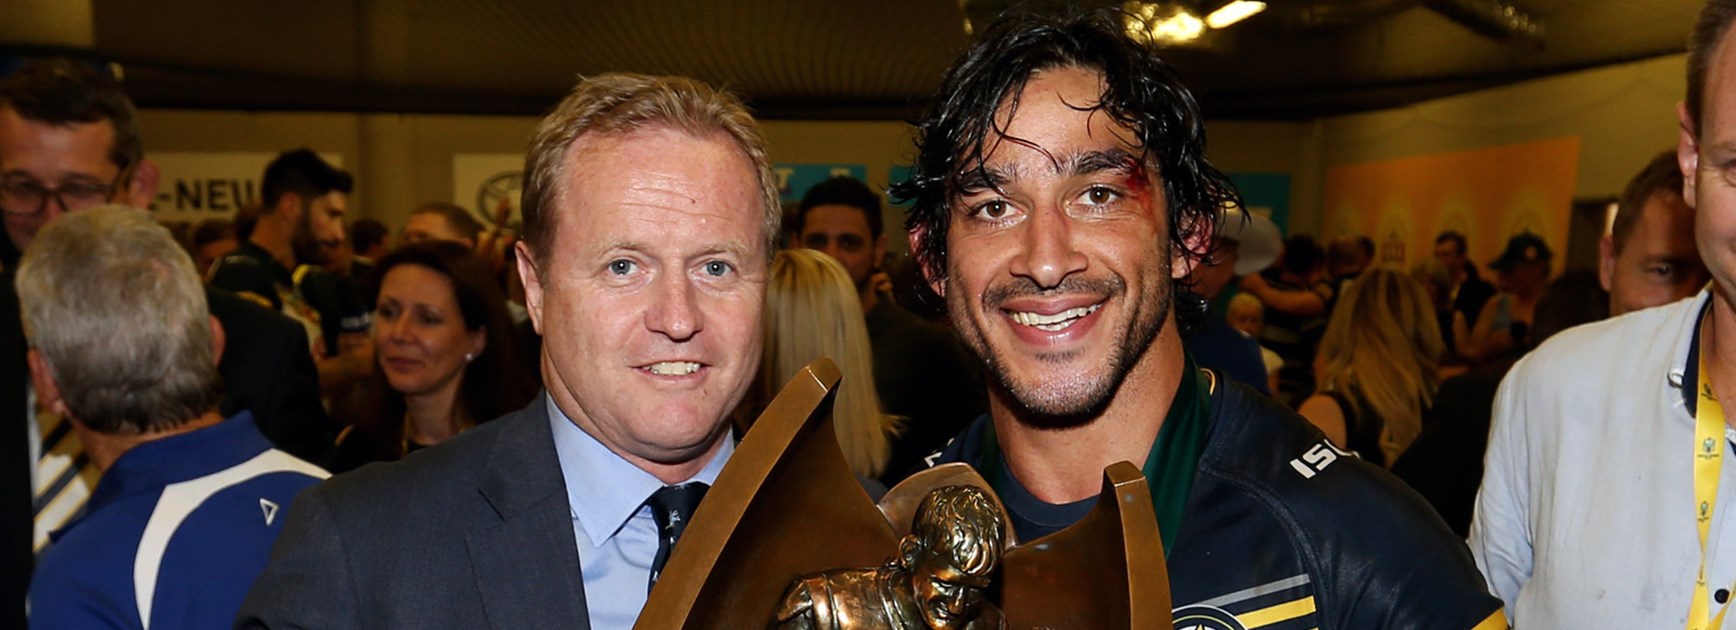 Departing NRL CEO Dave Smith with victorious Cowboys co-captain Johnathan Thurston following the 2015 Grand Final.